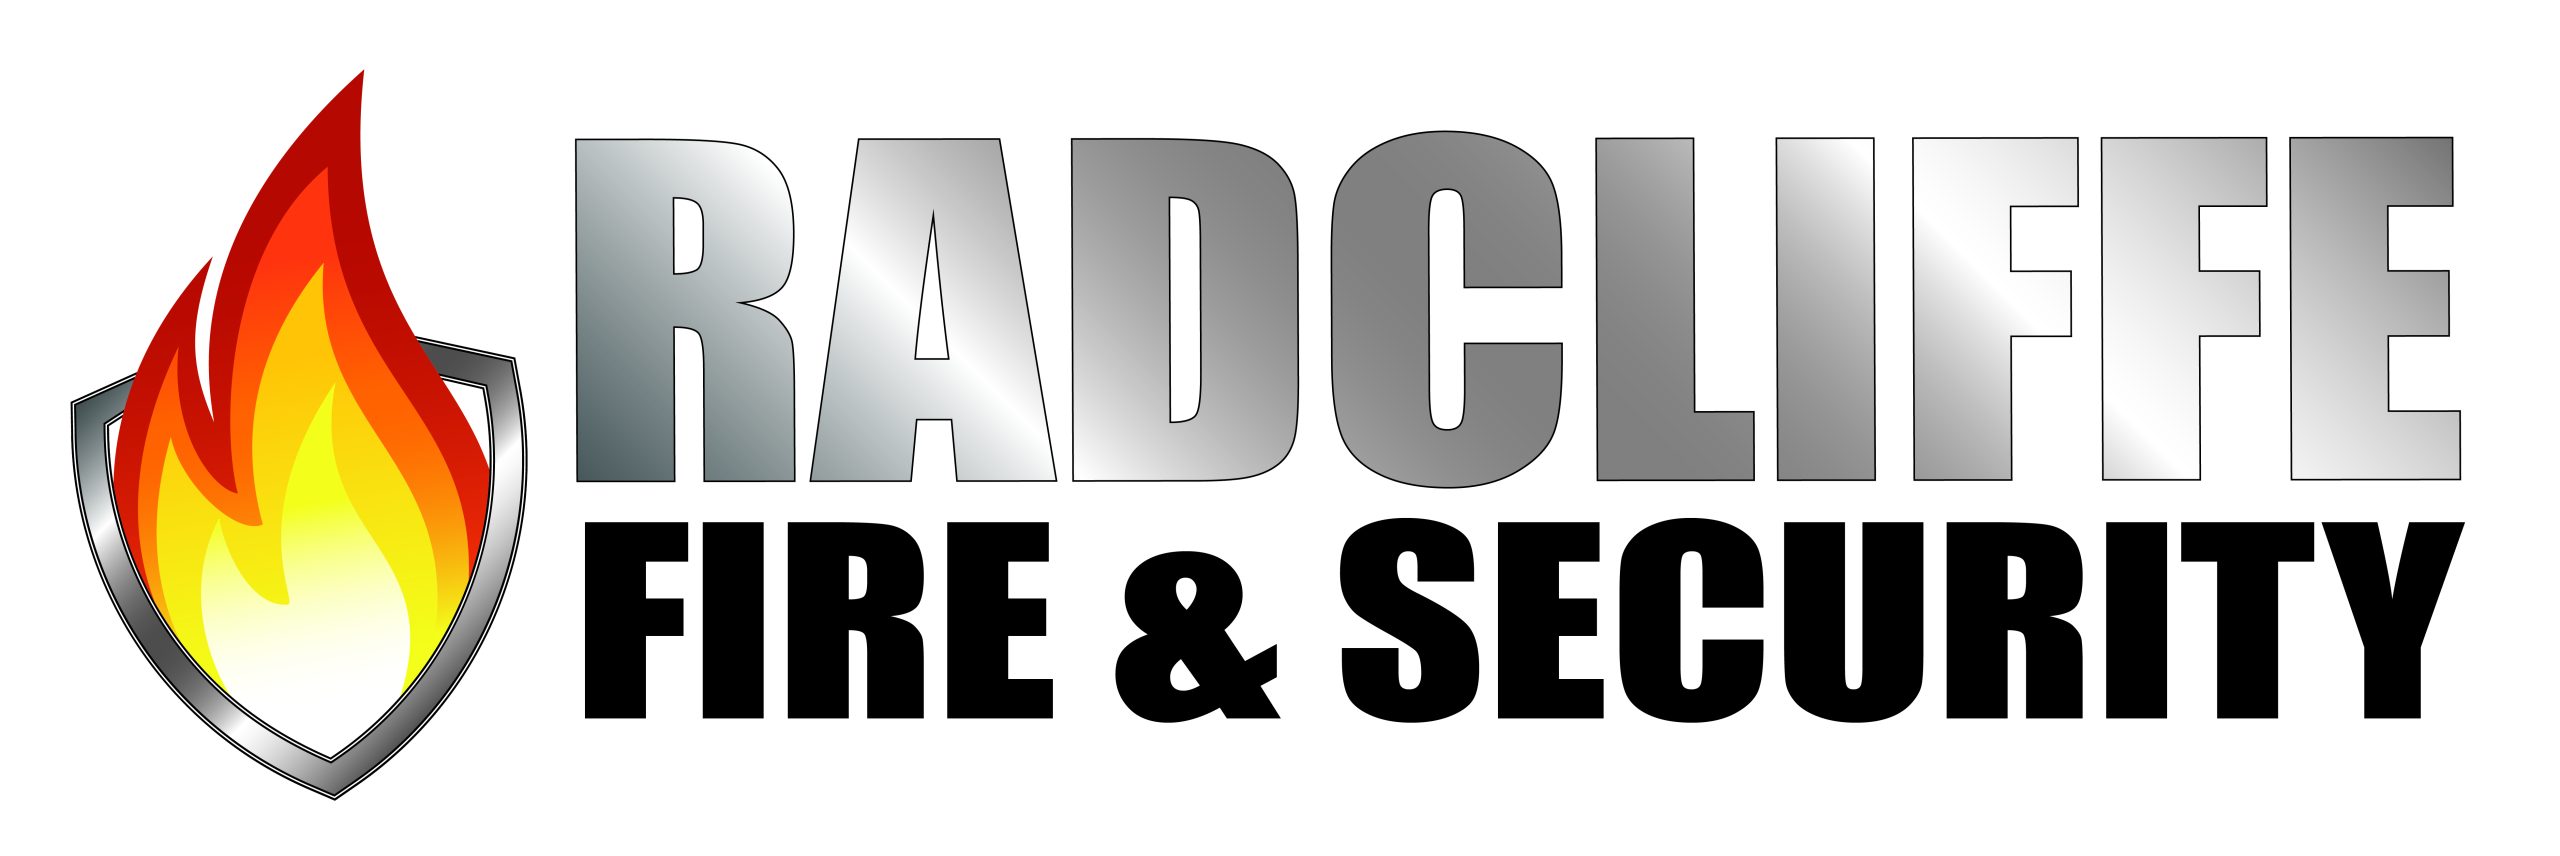 Radcliffe Fire & Security